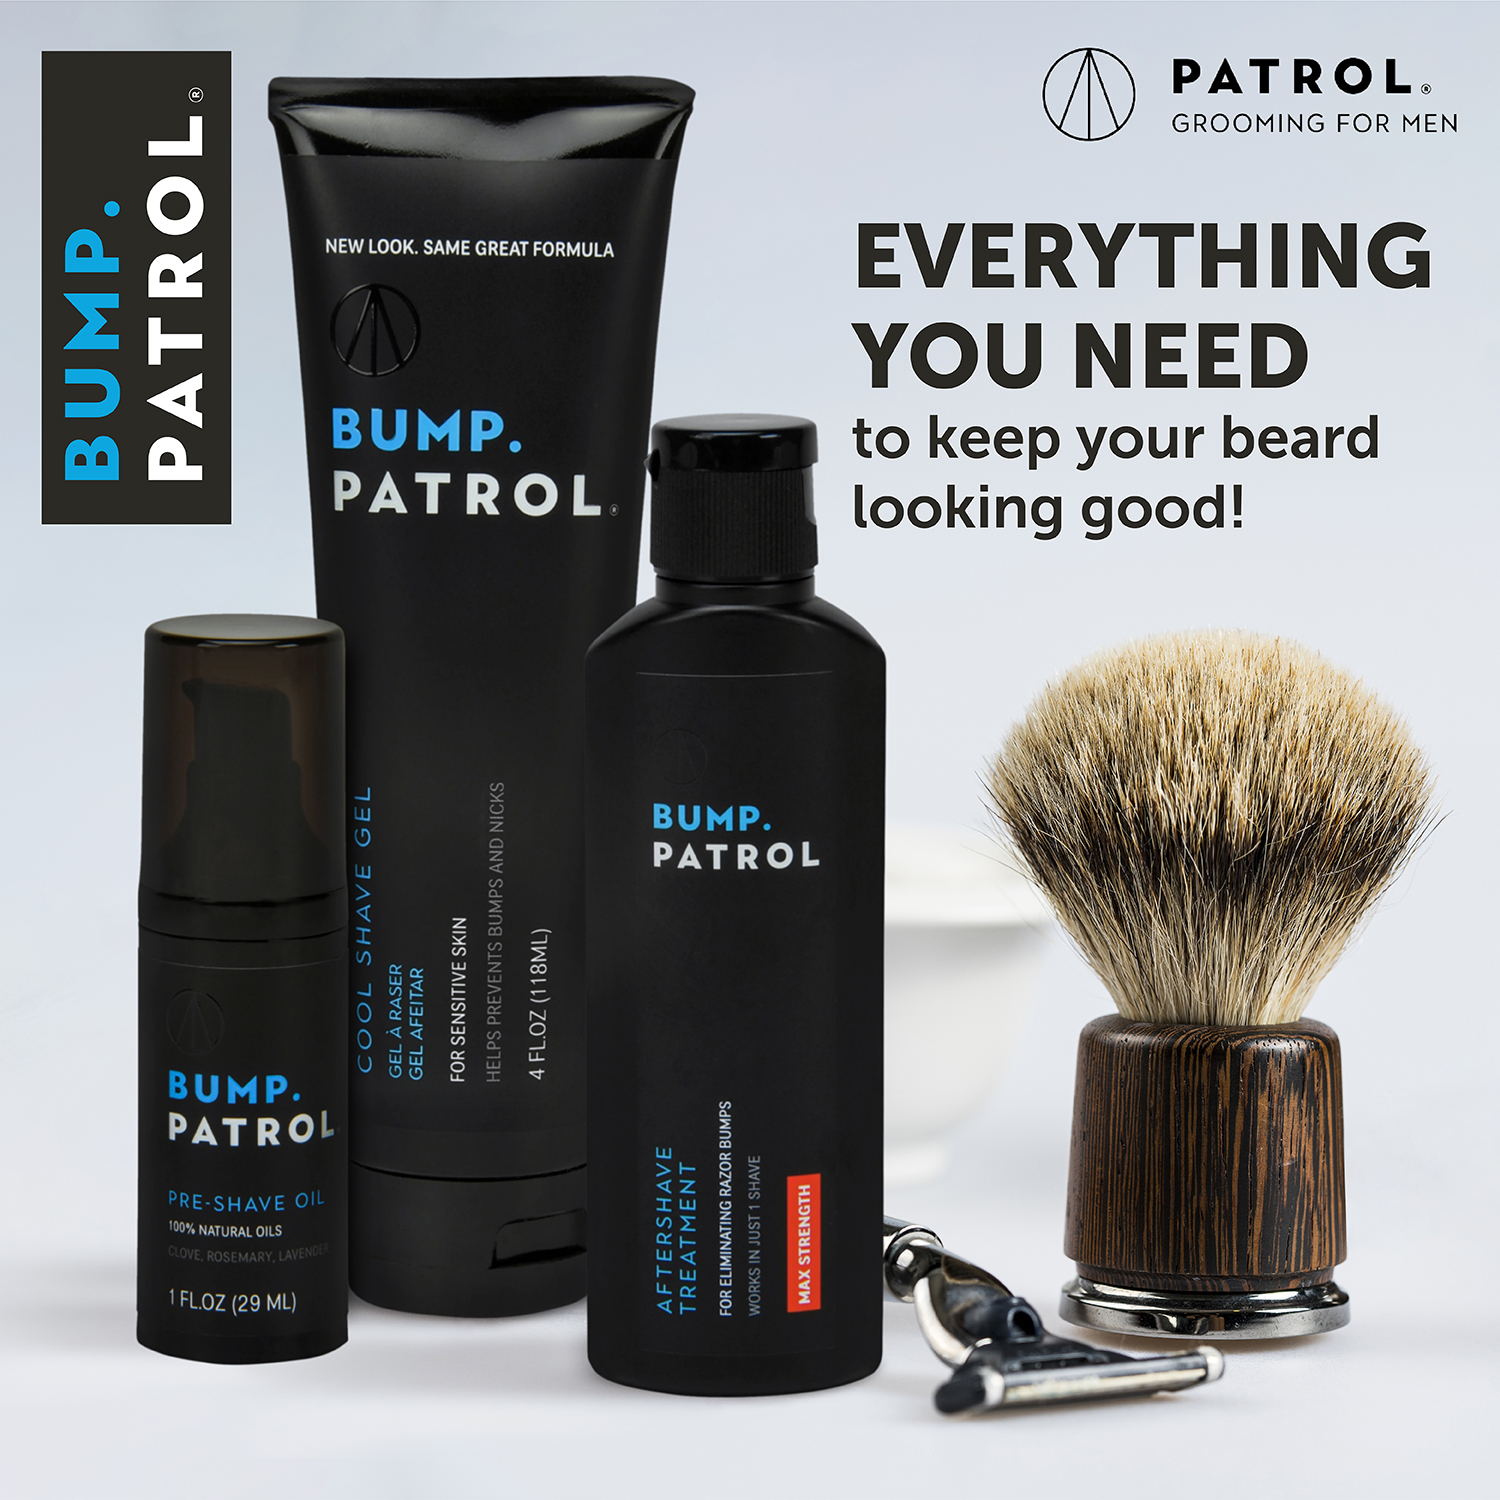 Bump Patrol Original Aftershave for Razor Bumps and Ingrown Hair - image 6 of 7